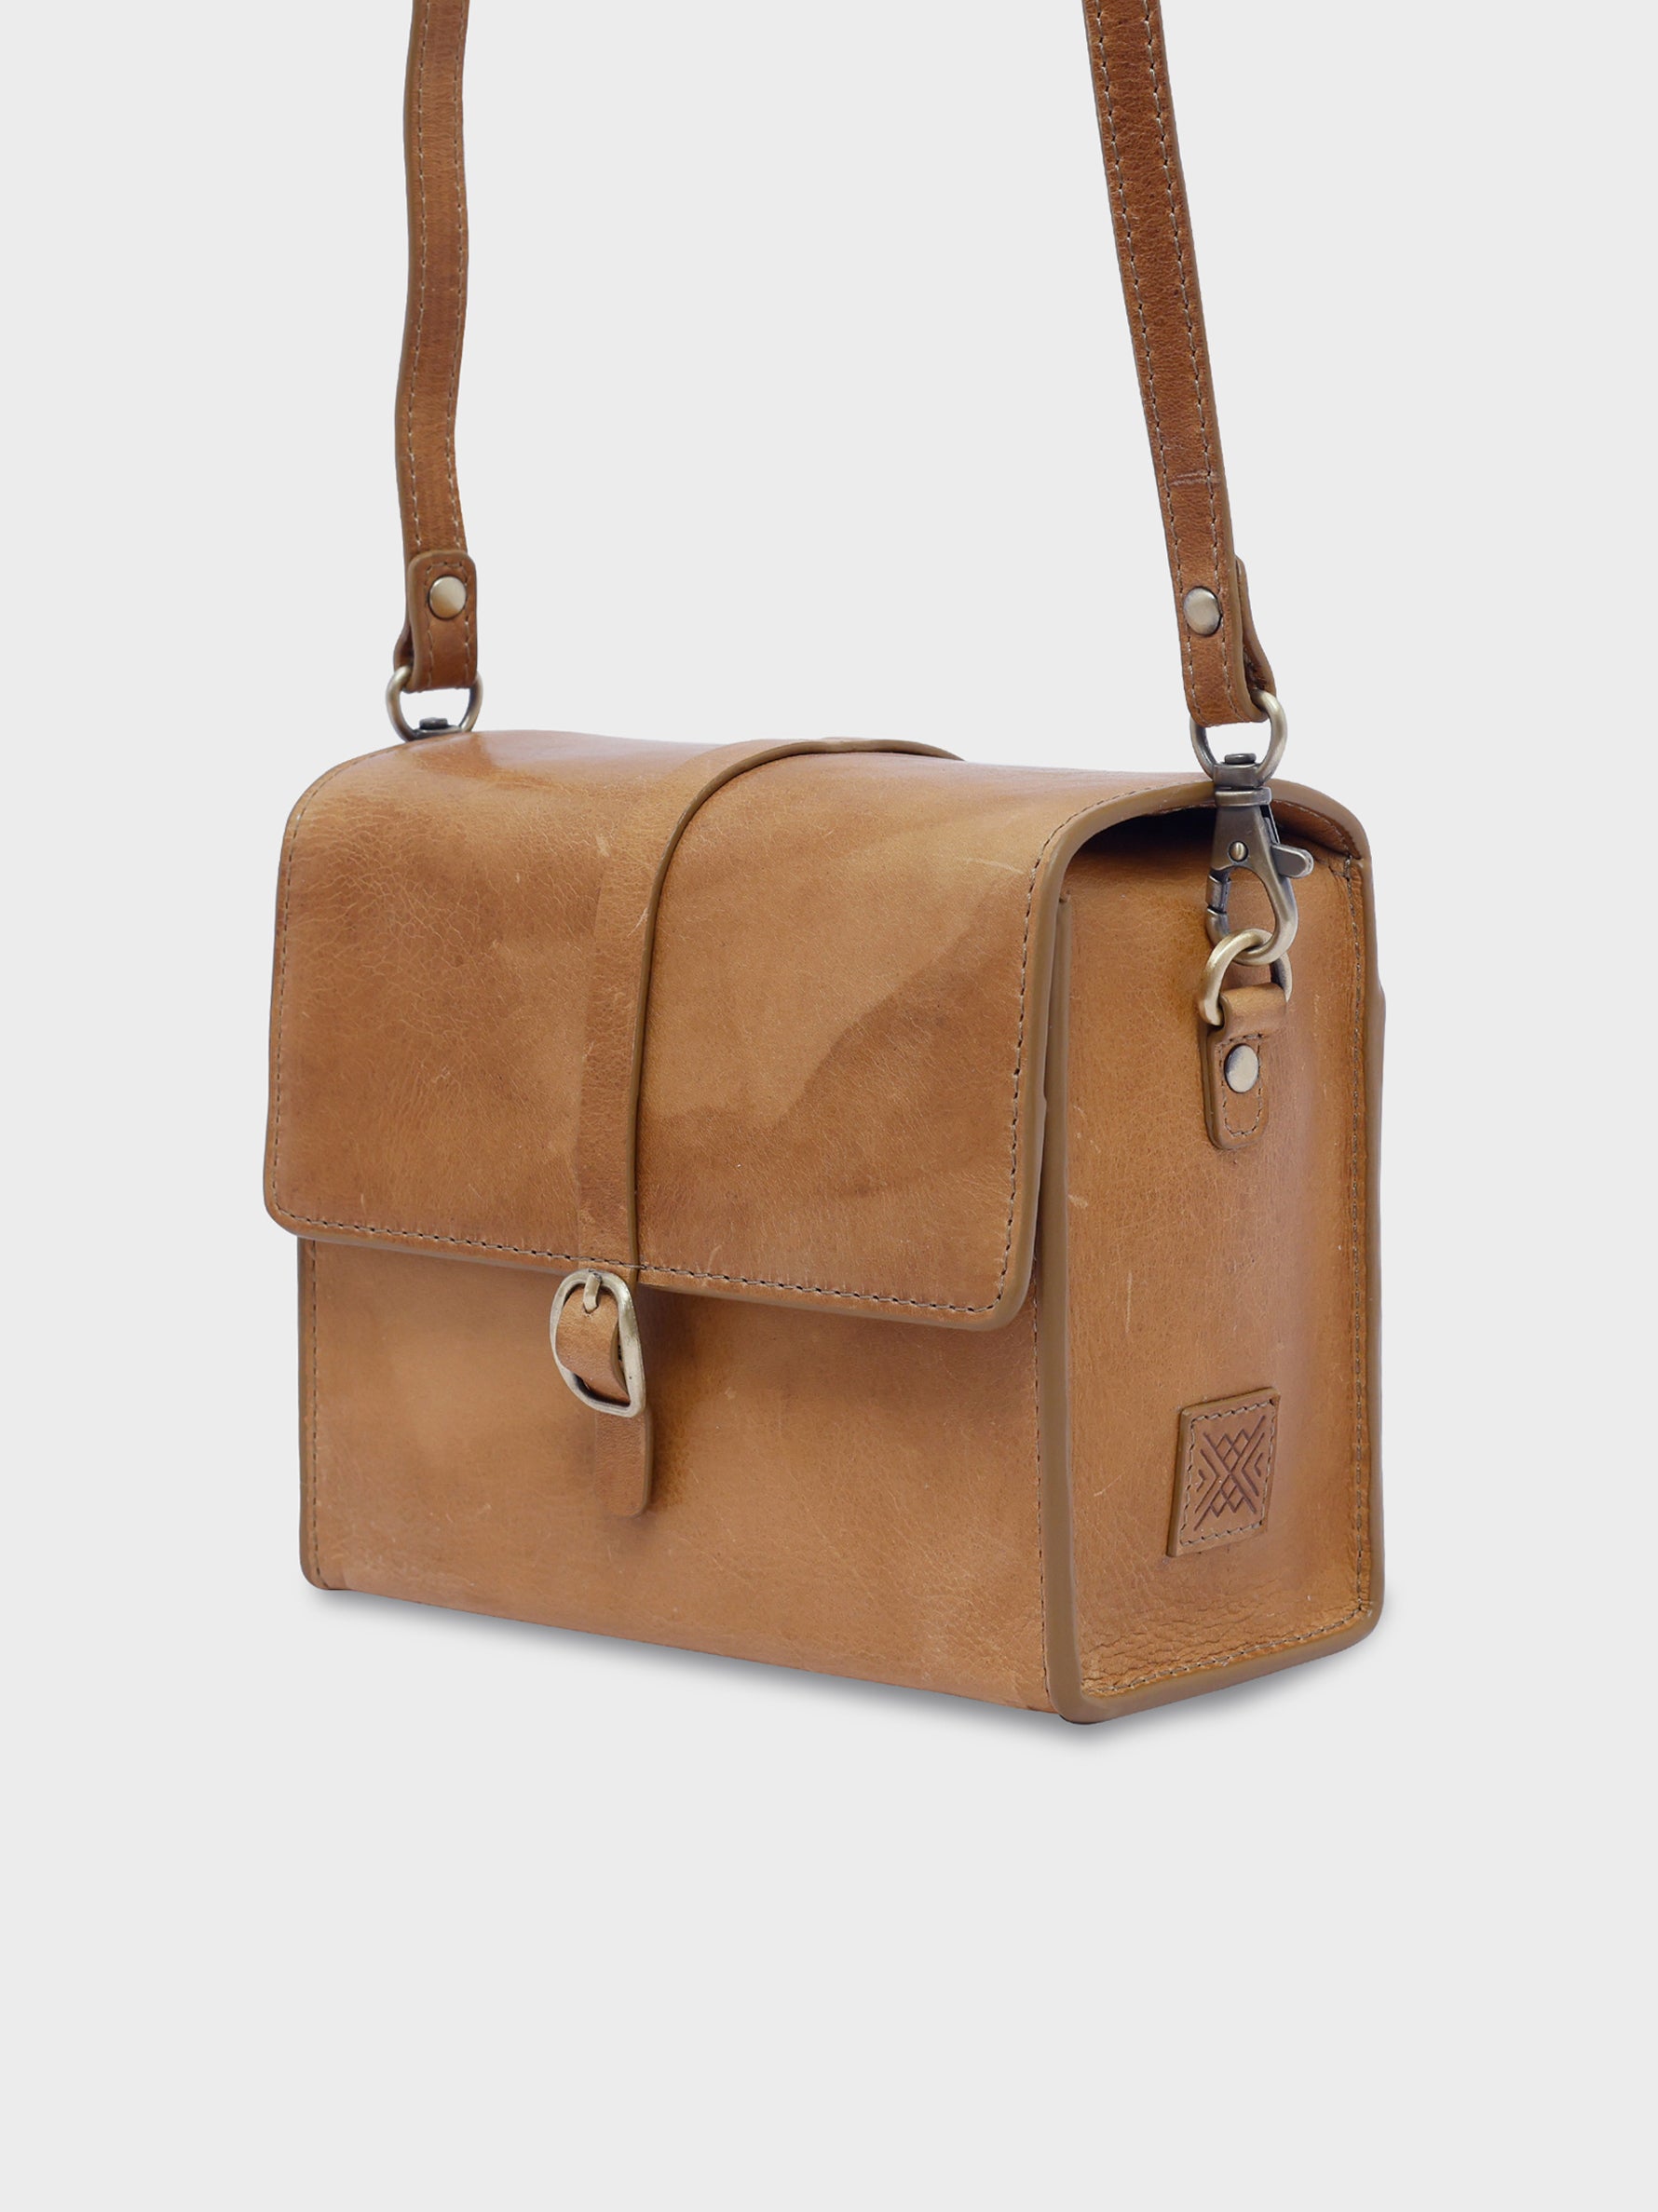 Handcrafted Genuine Vegetable Tanned Leather Piccolo Box Bag Tuscany Tan for Women Tan & Loom